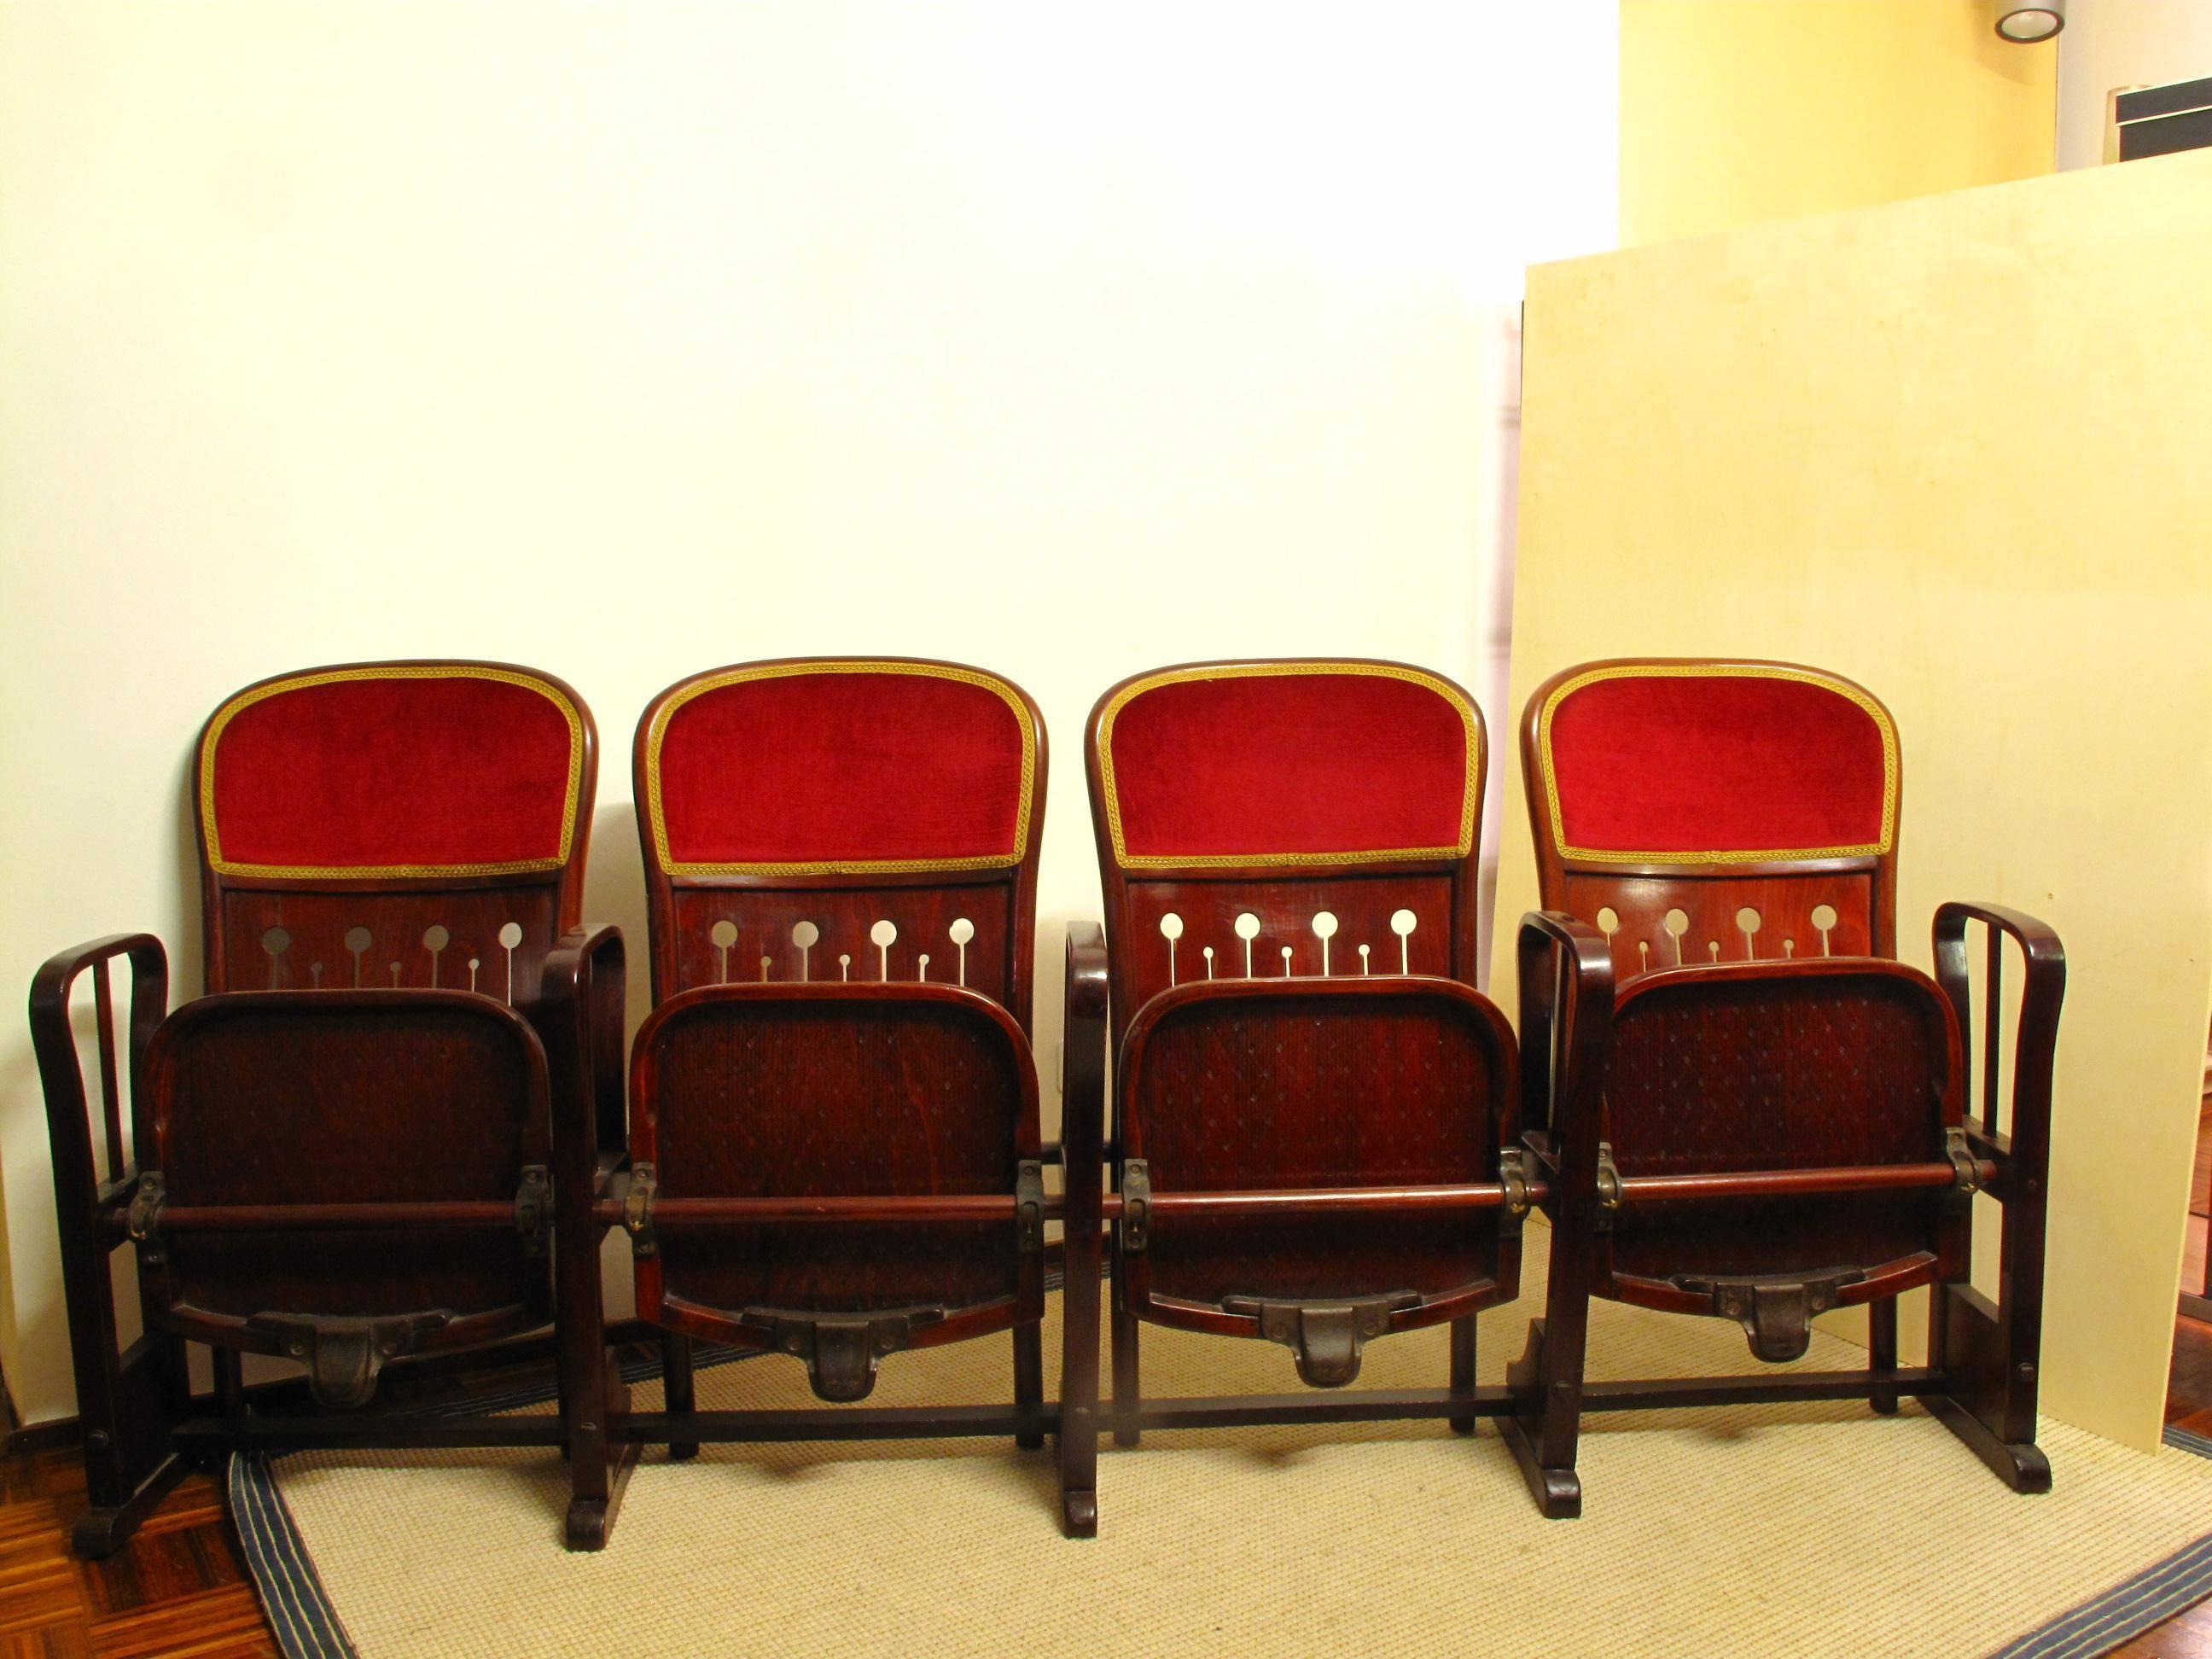 Vienna Secession Row of Four Bentwood Viennese Theatre Chairs by Thonet, circa 1907 For Sale